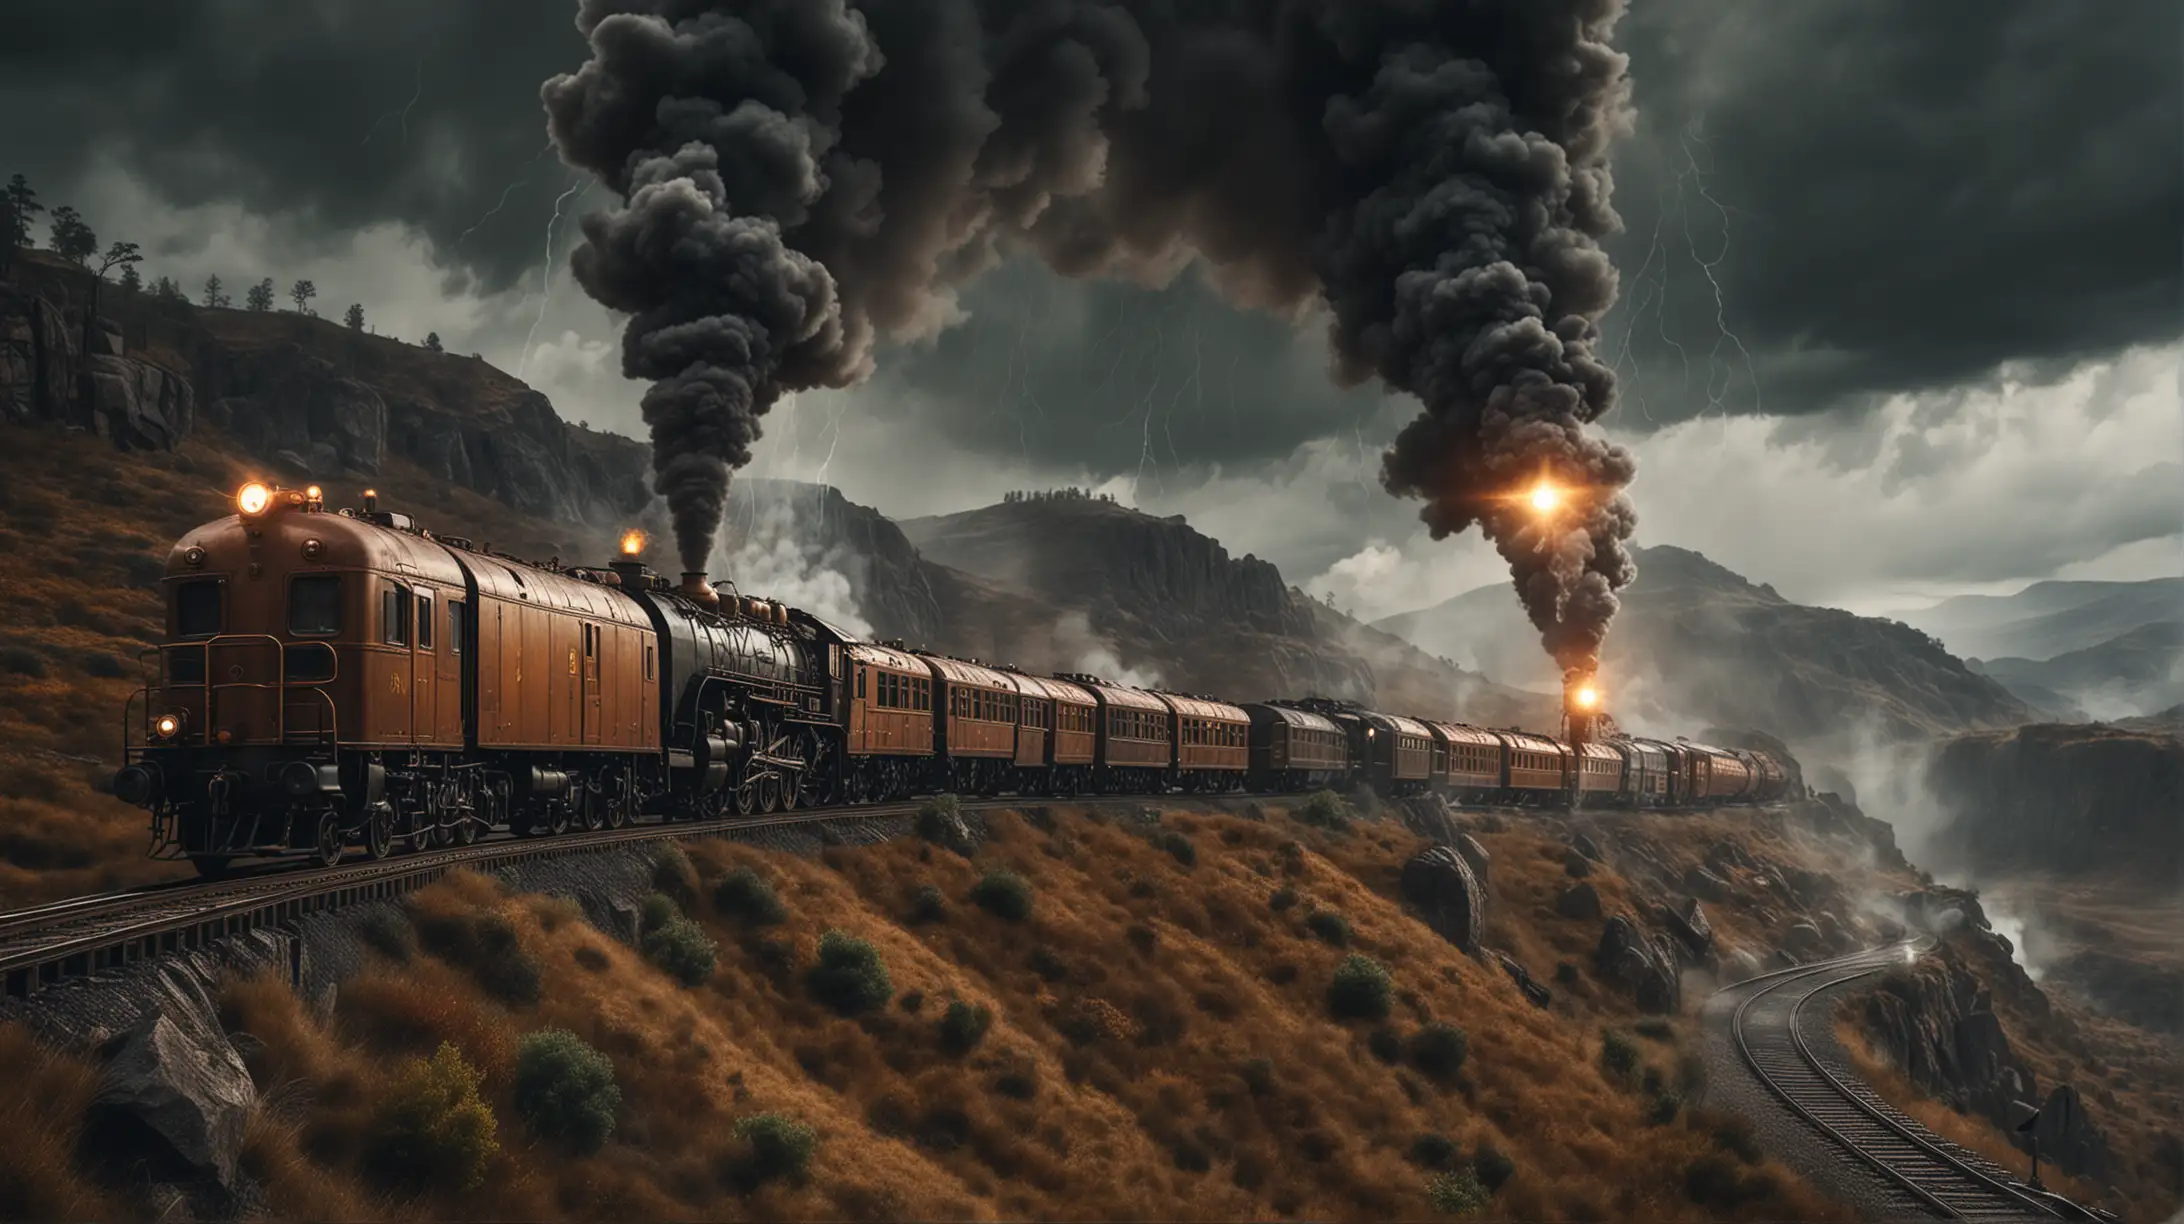 a long steampunk train with two diesel locomotives runs through the wilderness, storm with lighting, dark, copper, steel, glass, gold, steam, smoke, distant view from a very high hill